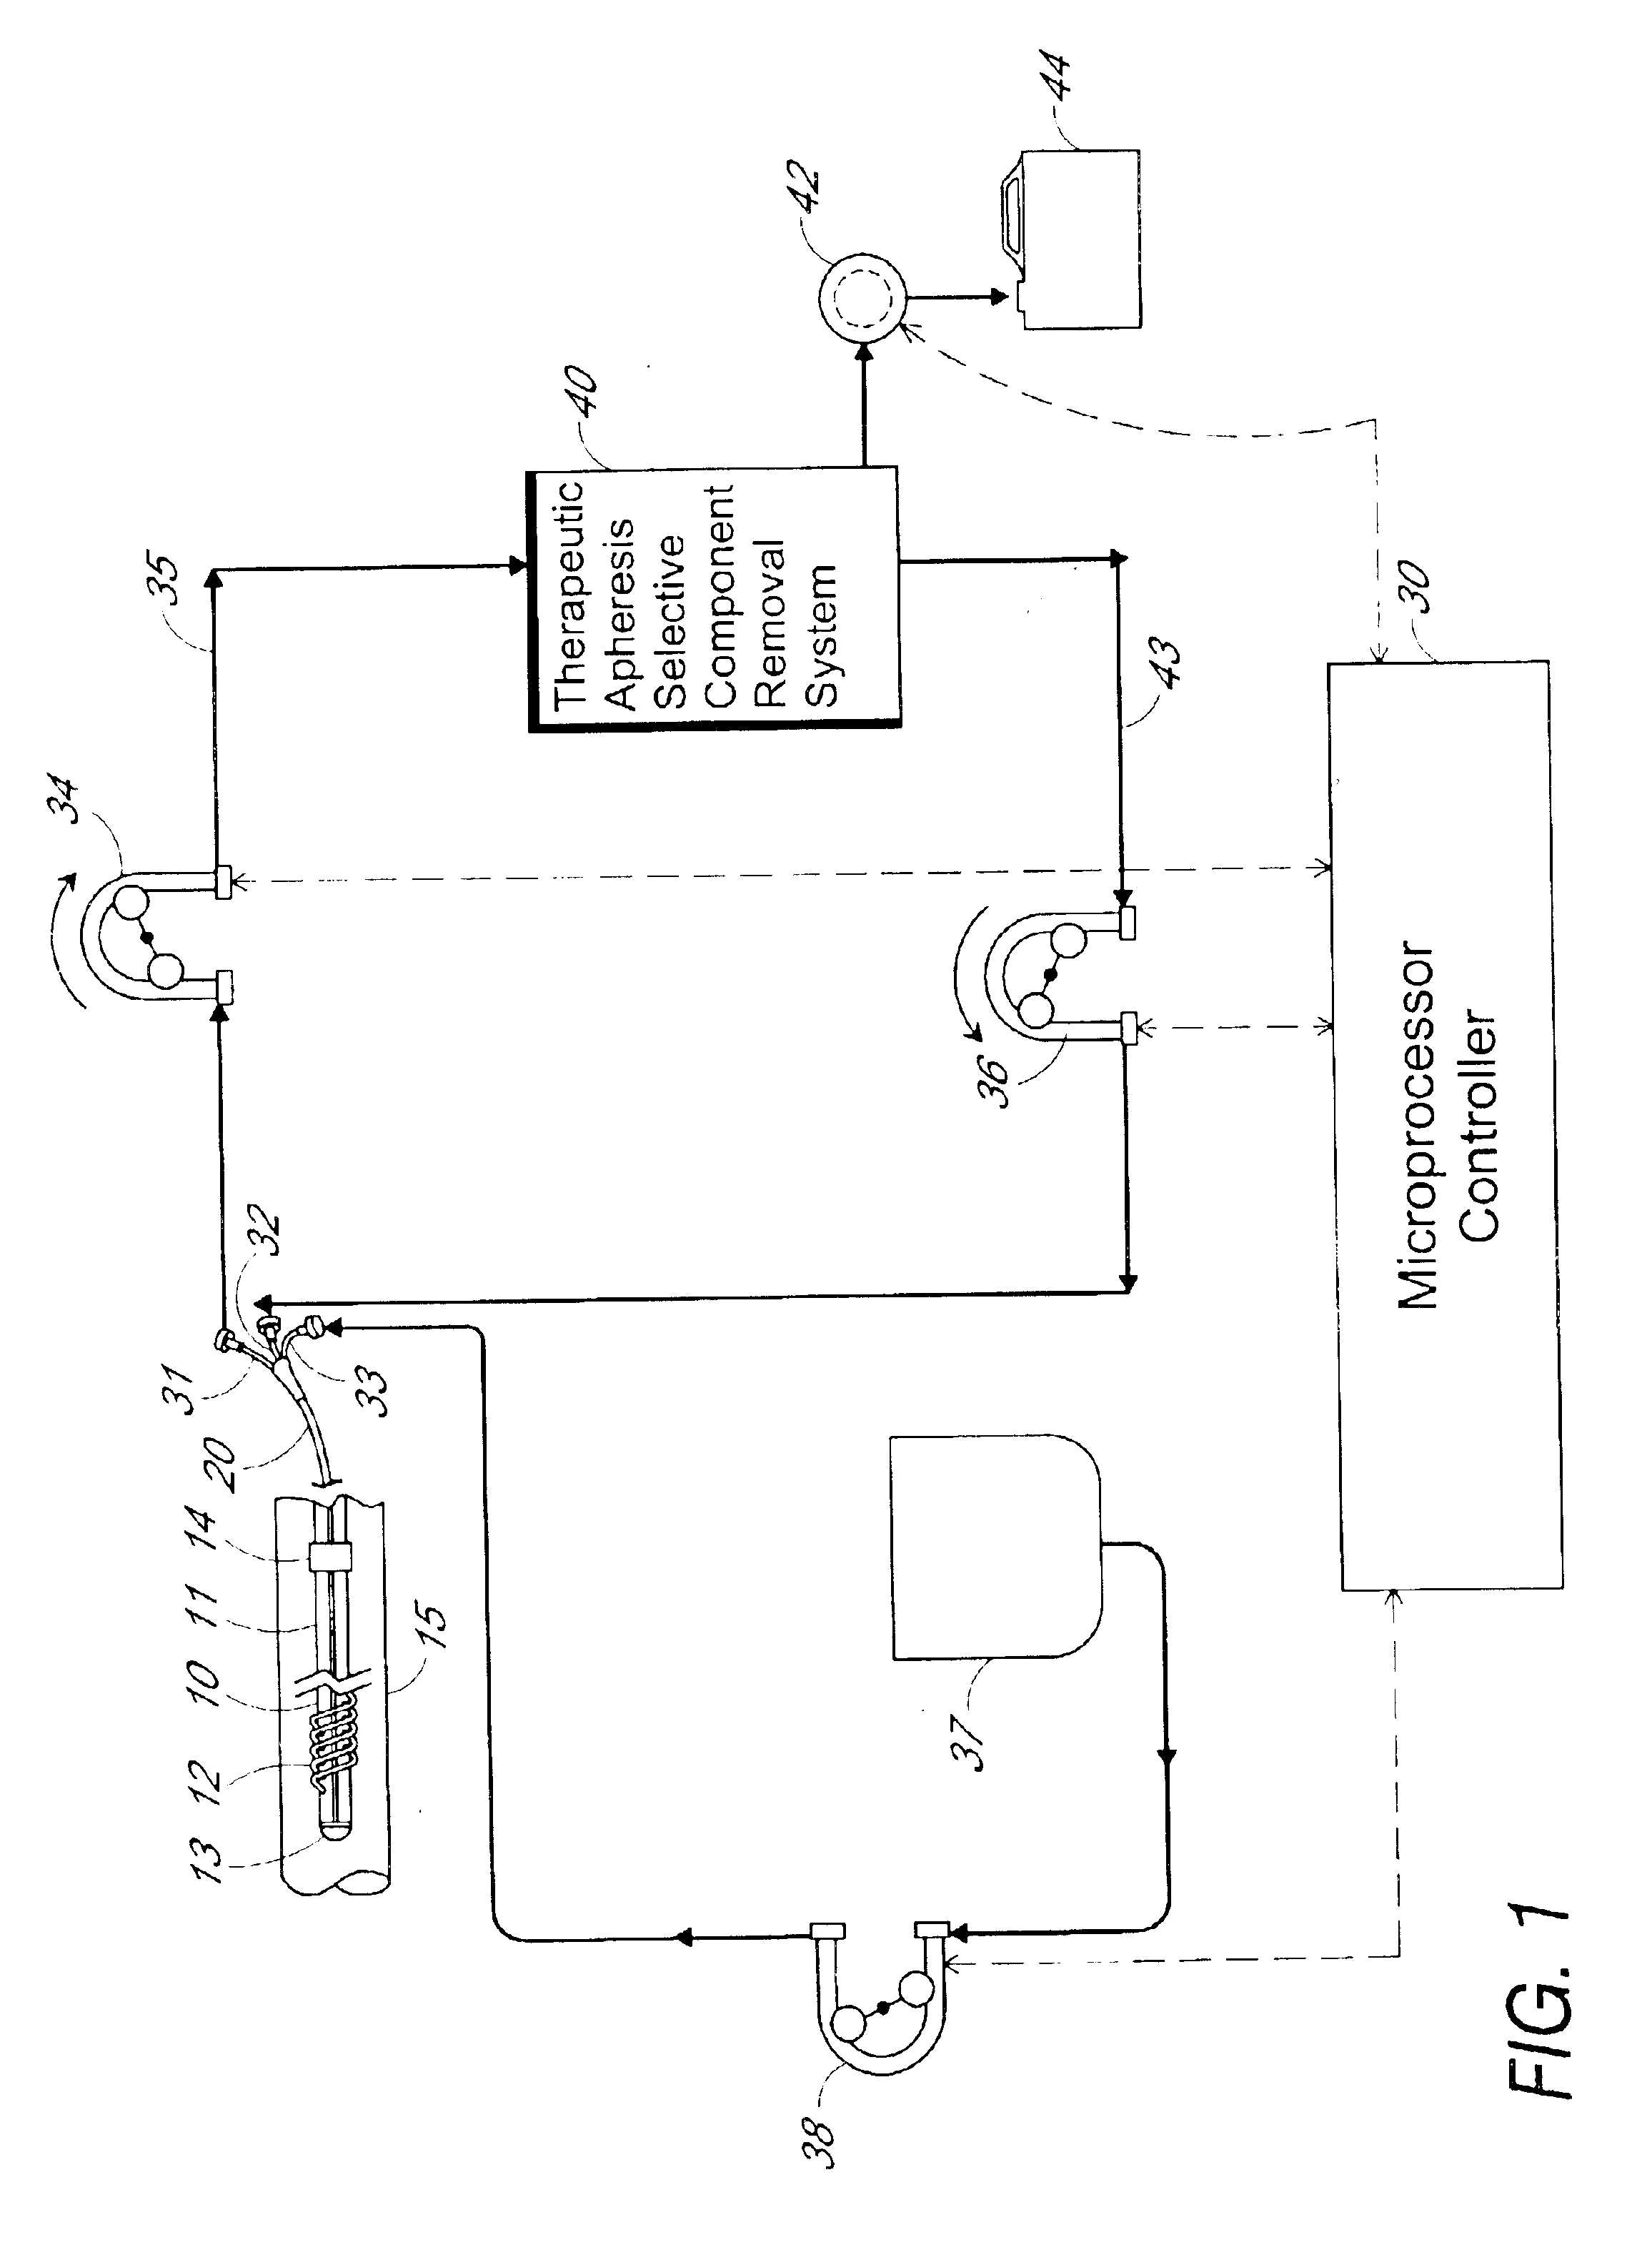 Method and apparatus for therapeutic apheresis